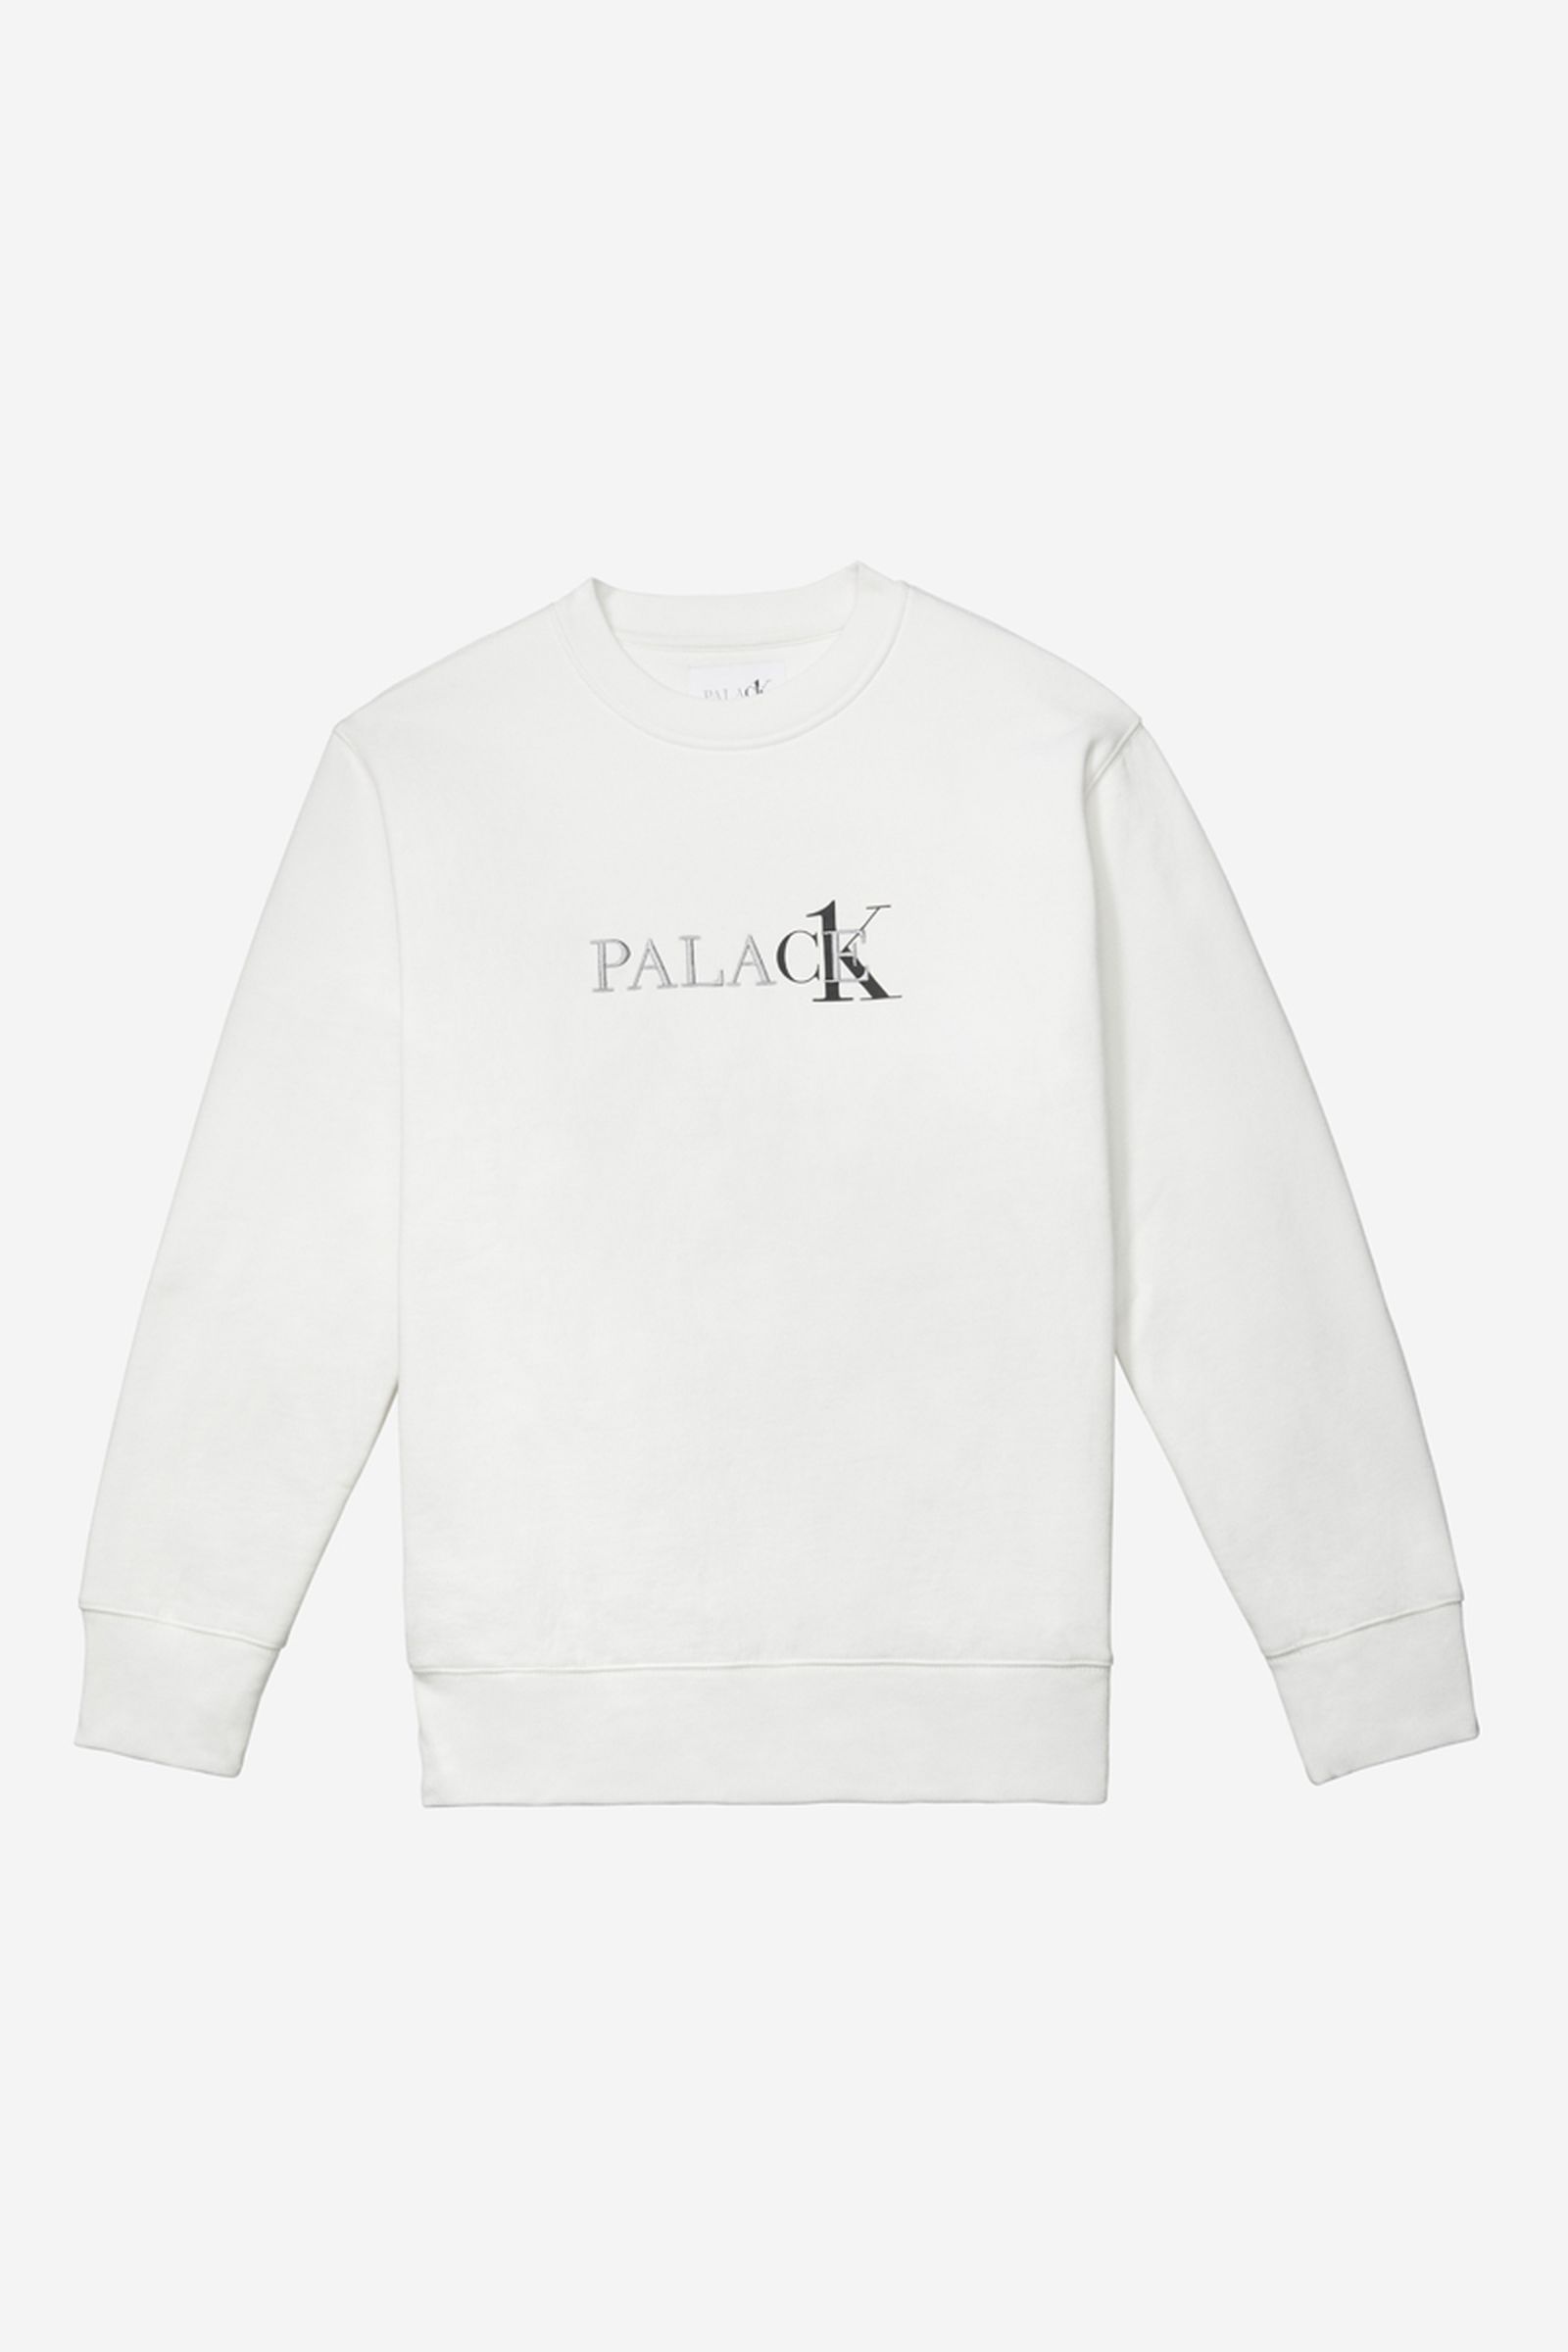 palace-calvin-klein-collab-collection-price-underwear-release-date (33)